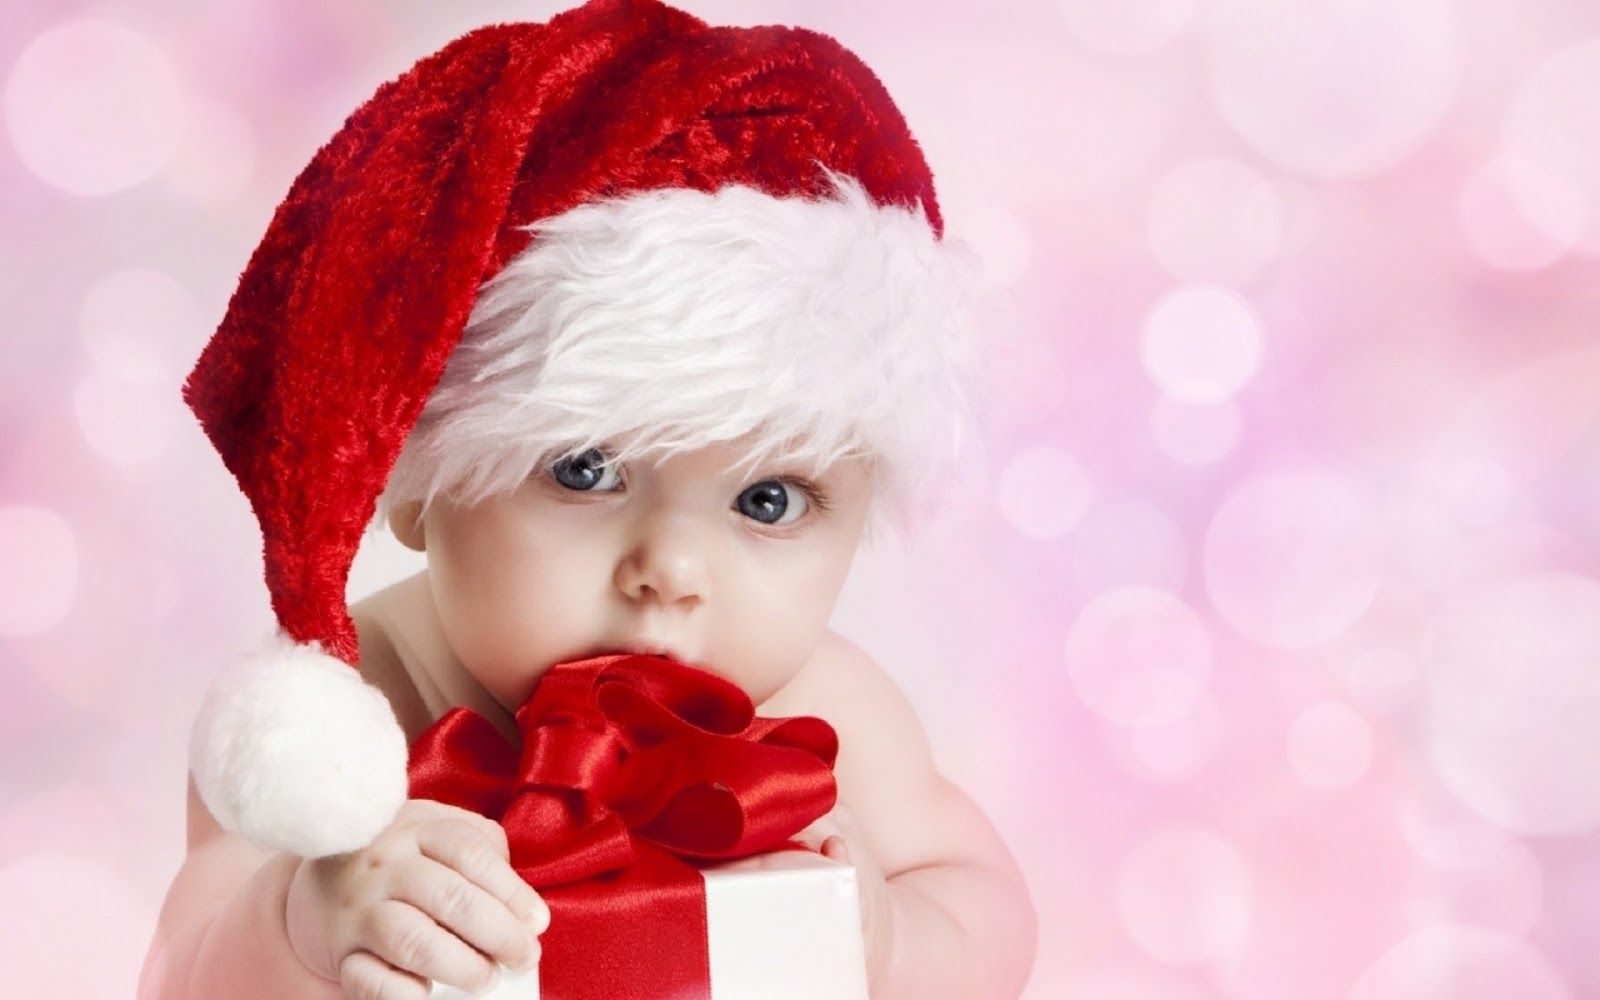 Beautiful Baby in Christmas outfit Image for wishing Merry Christmas